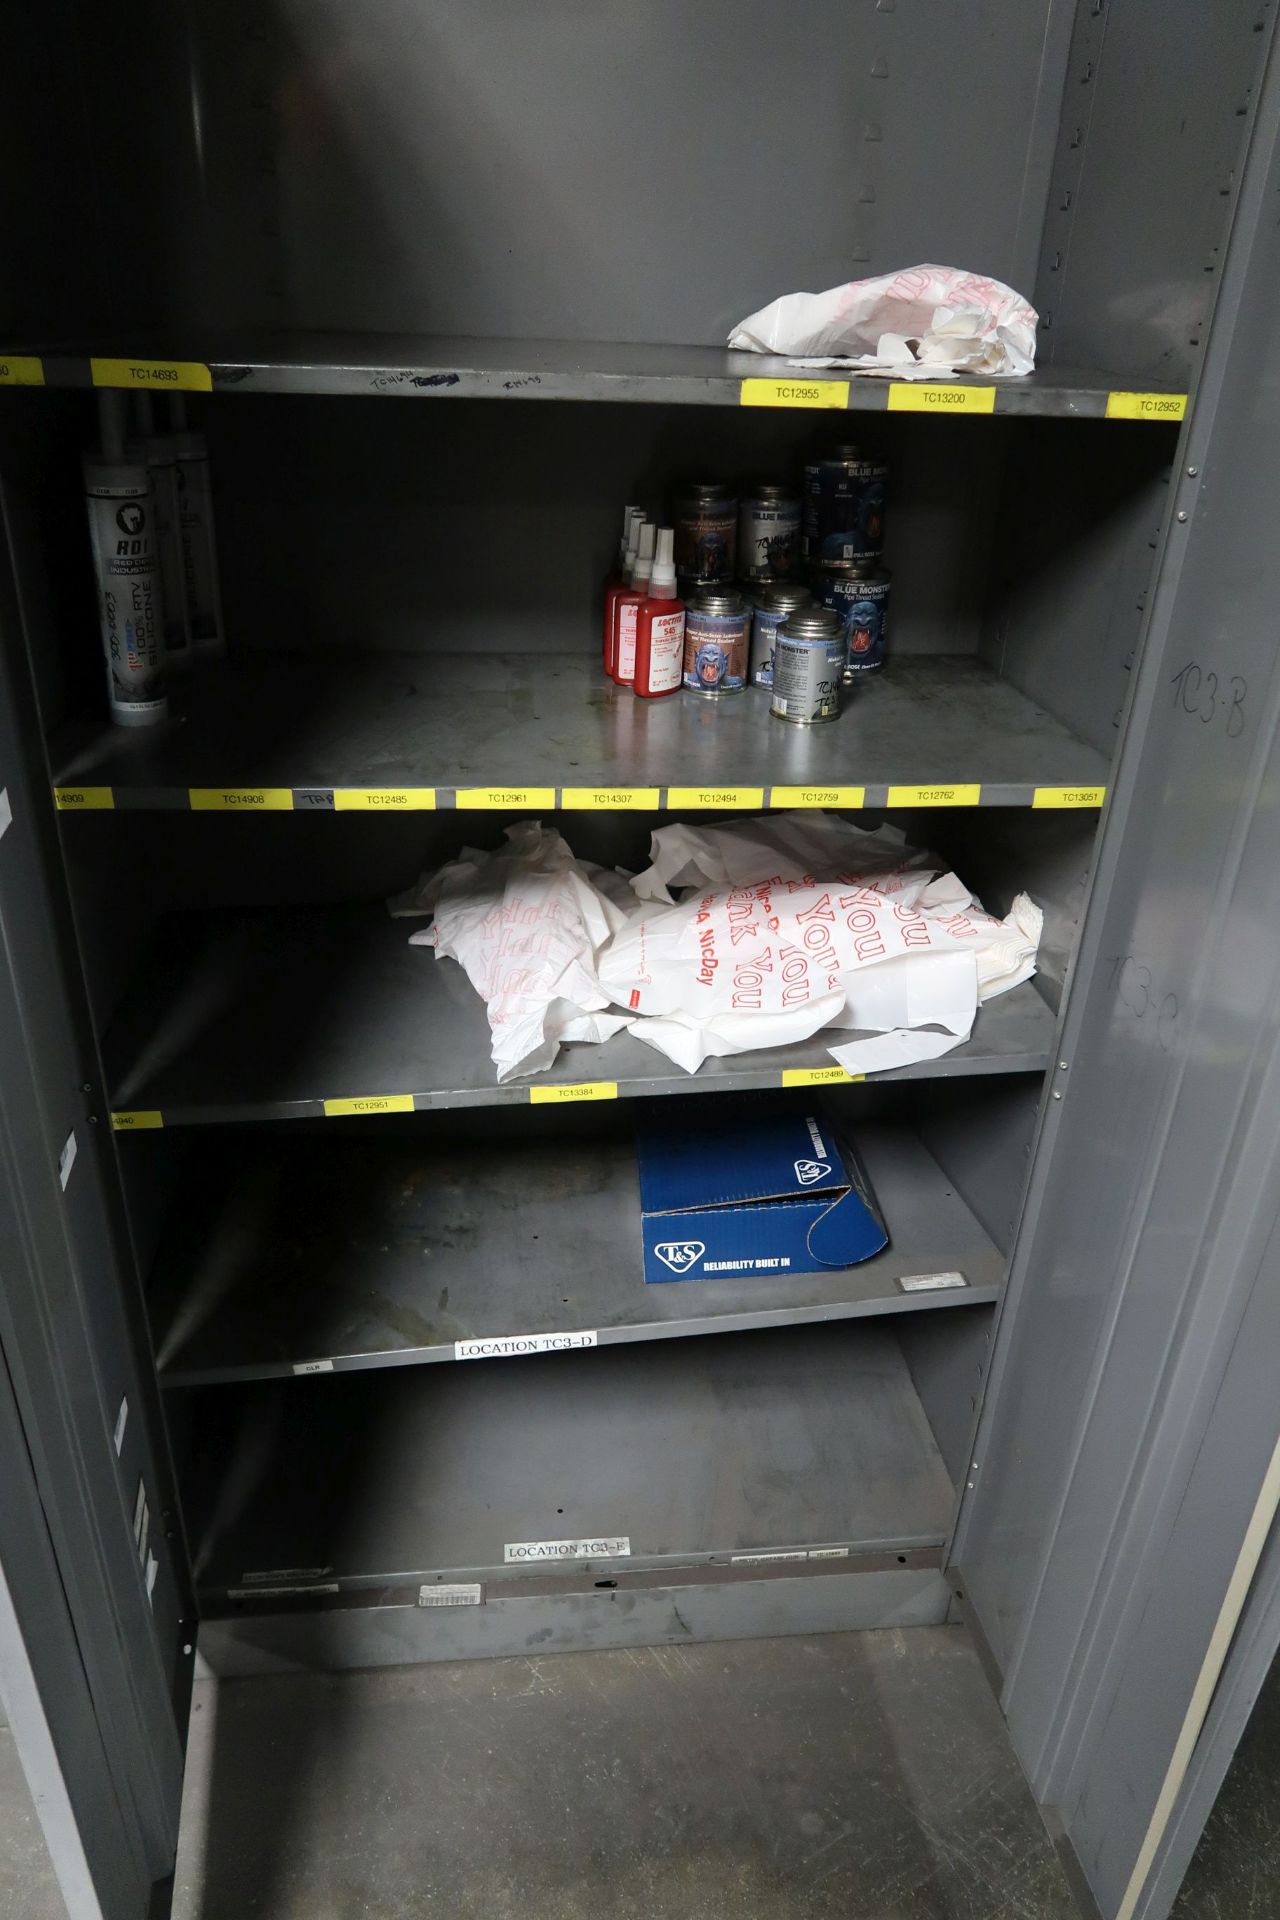 STORAGE CABINET WITH MAINTENANCE ITEMS **LOADING PRICE DUE TO ERRA - $75.00** - Image 3 of 4